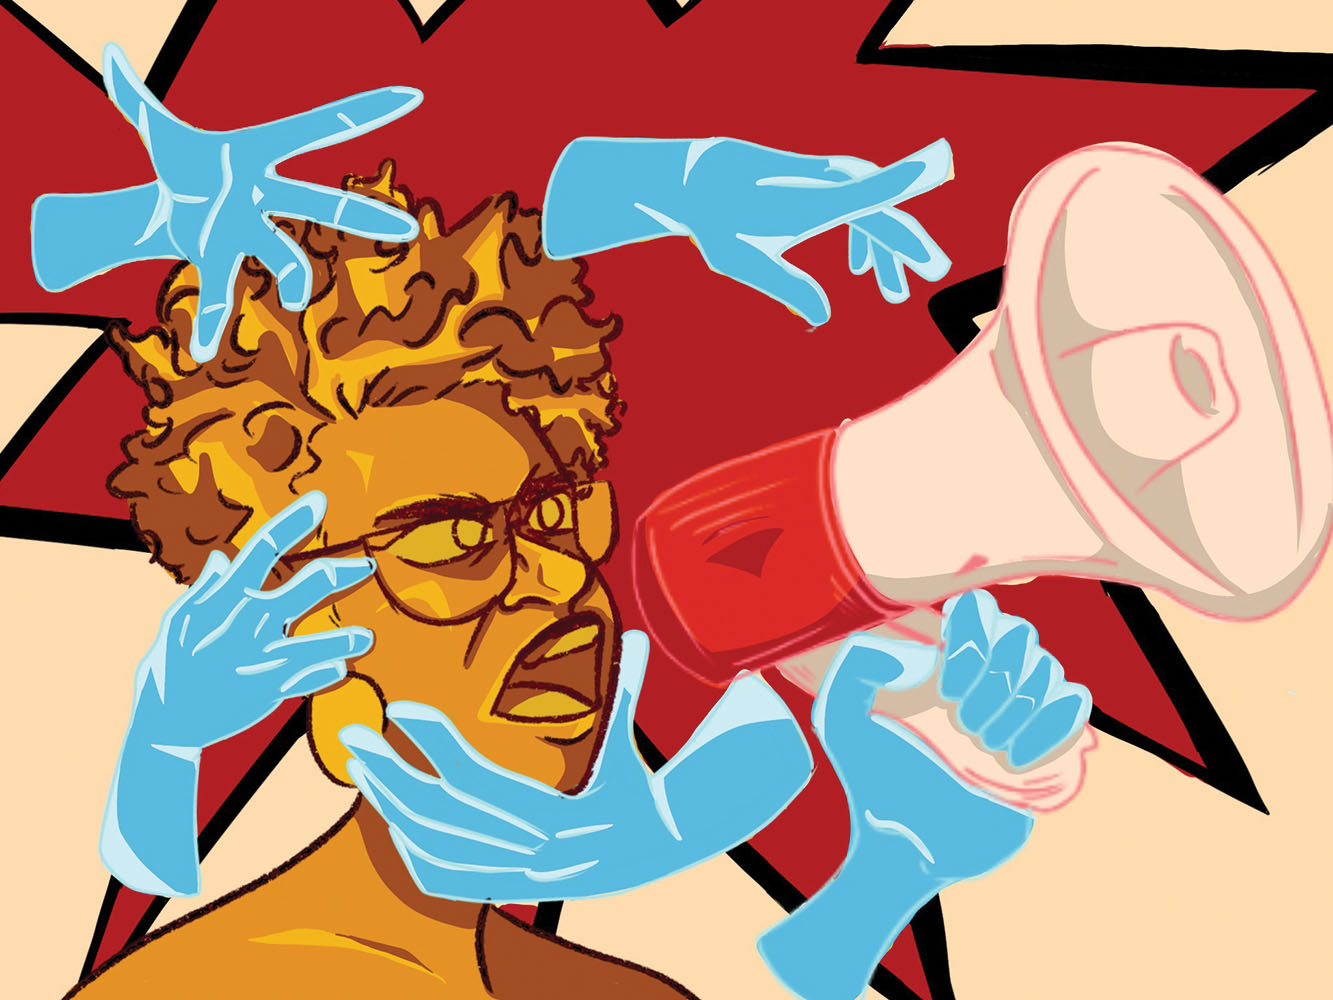 Illustration of a figure with an afro shouting into a megaphone. Blue hands appear in the image.